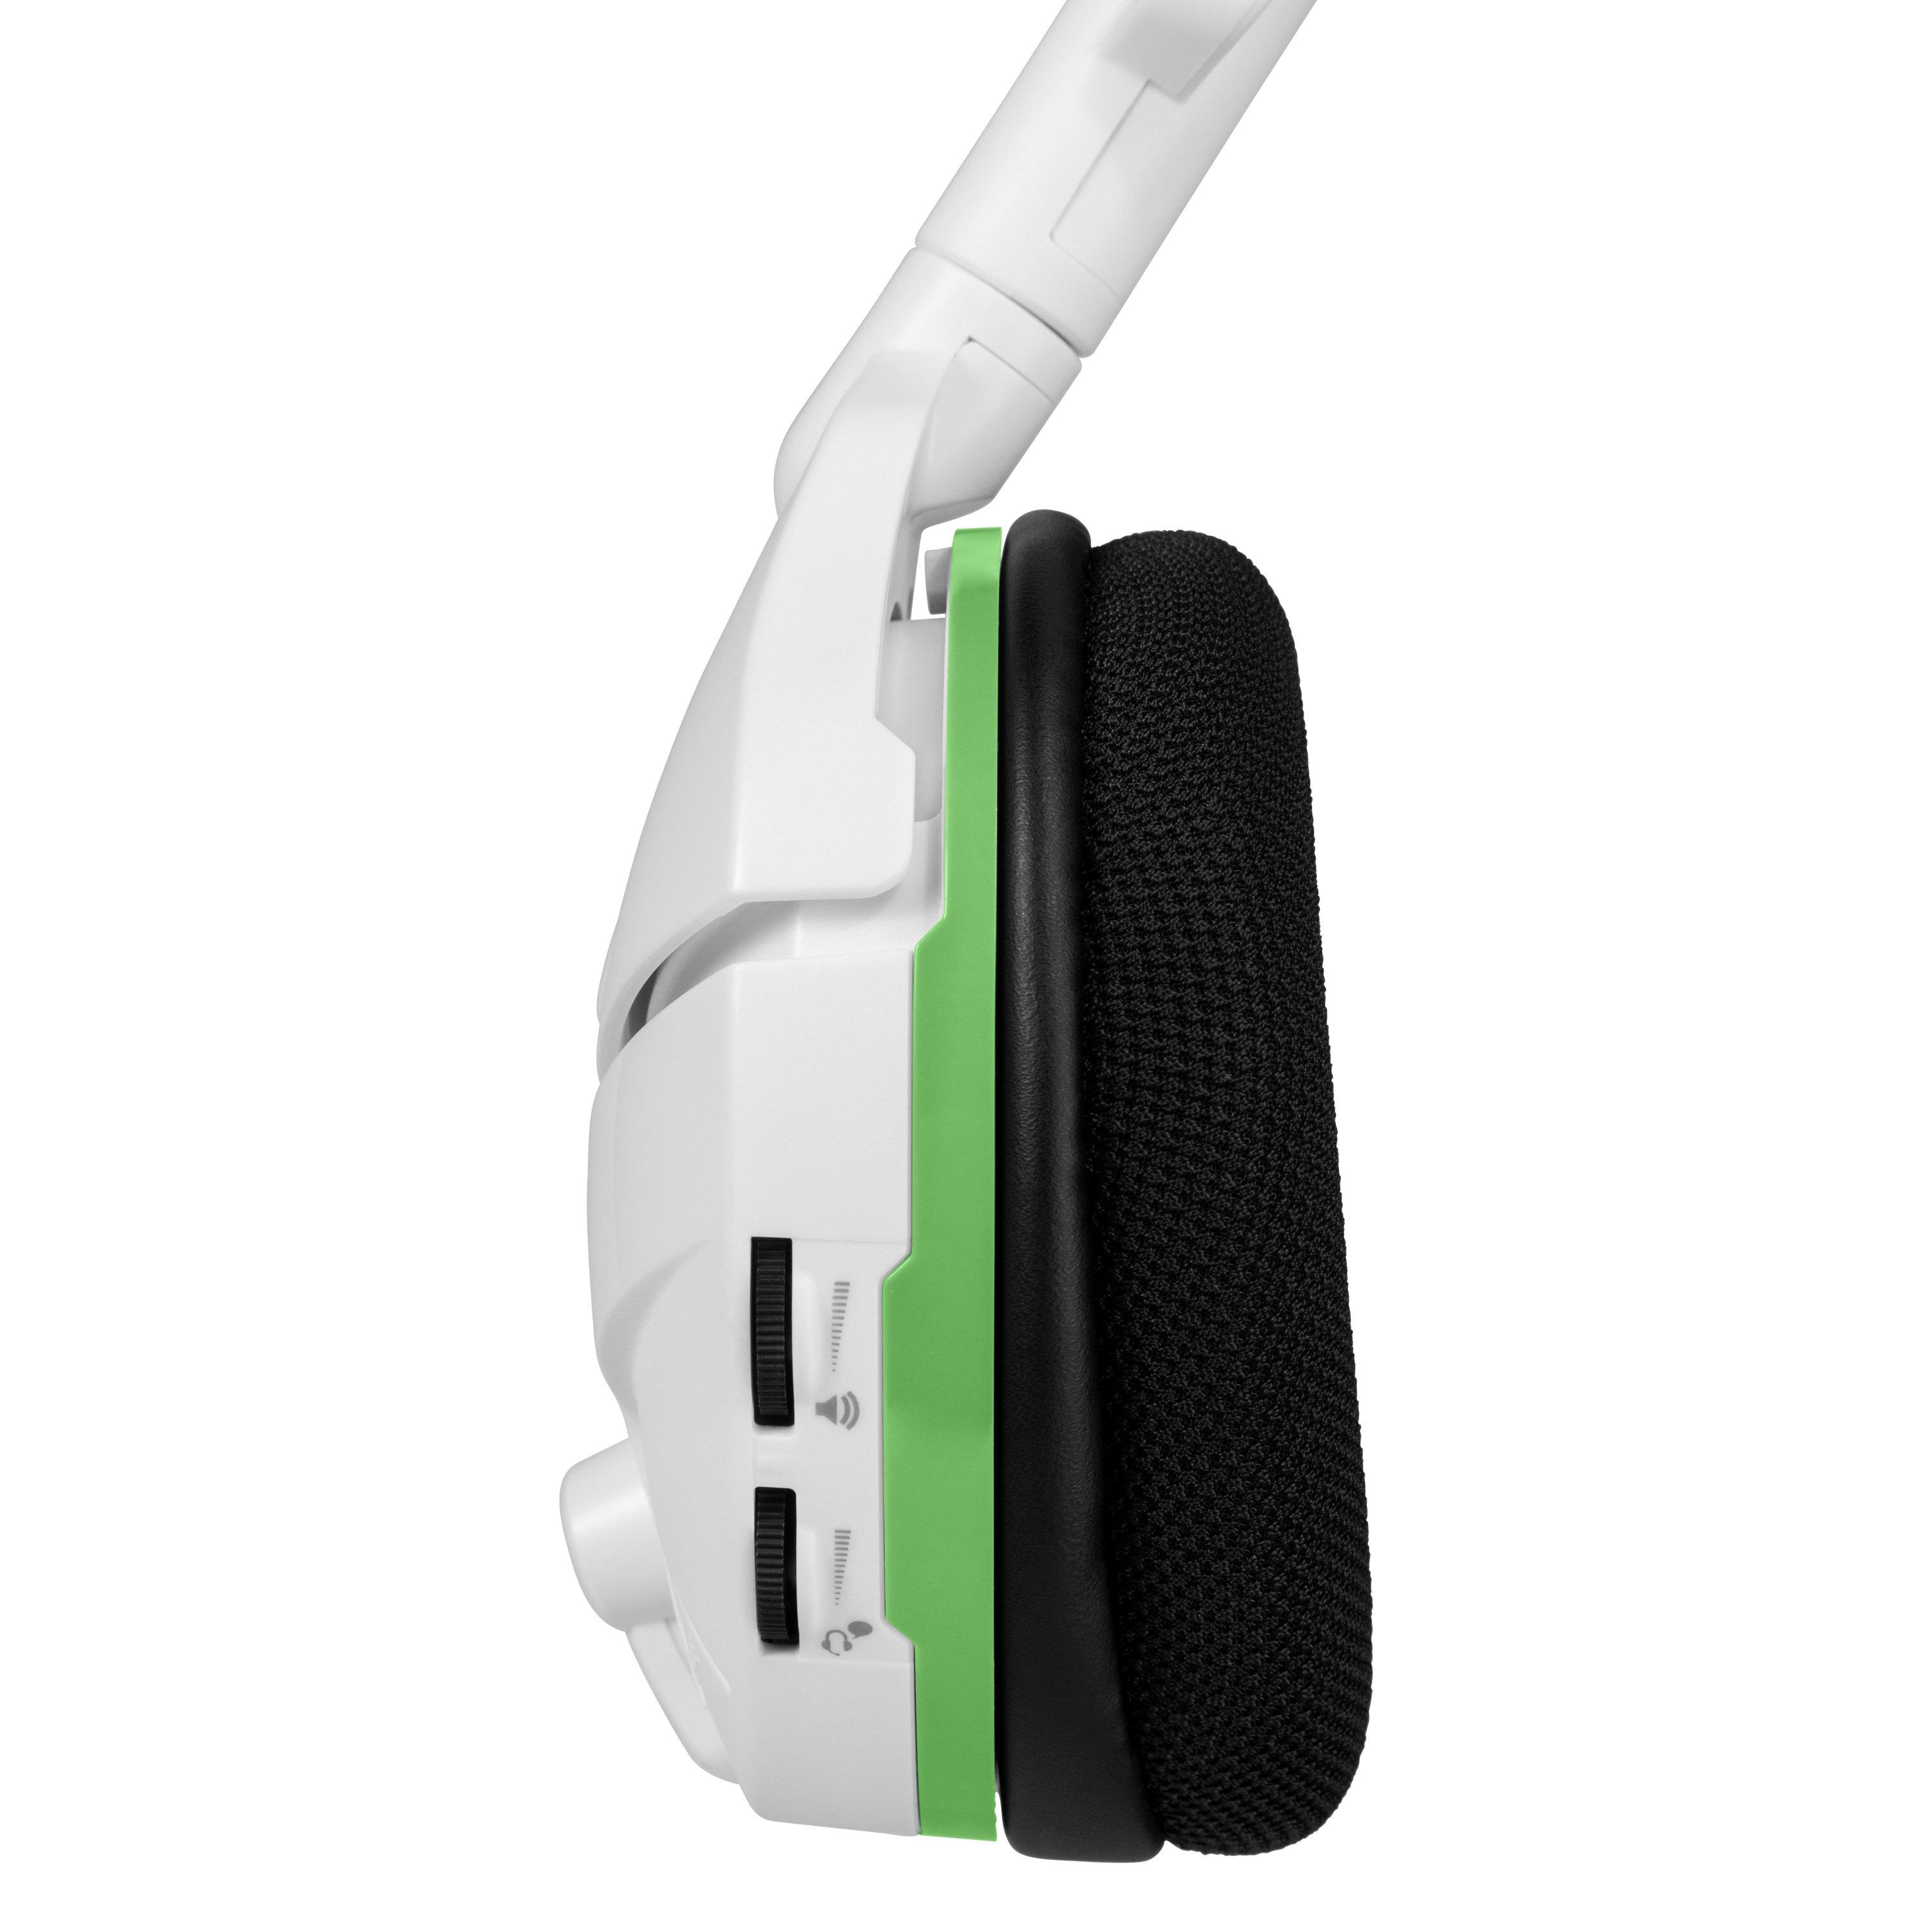 xbox one stealth 600 white wireless gaming headset